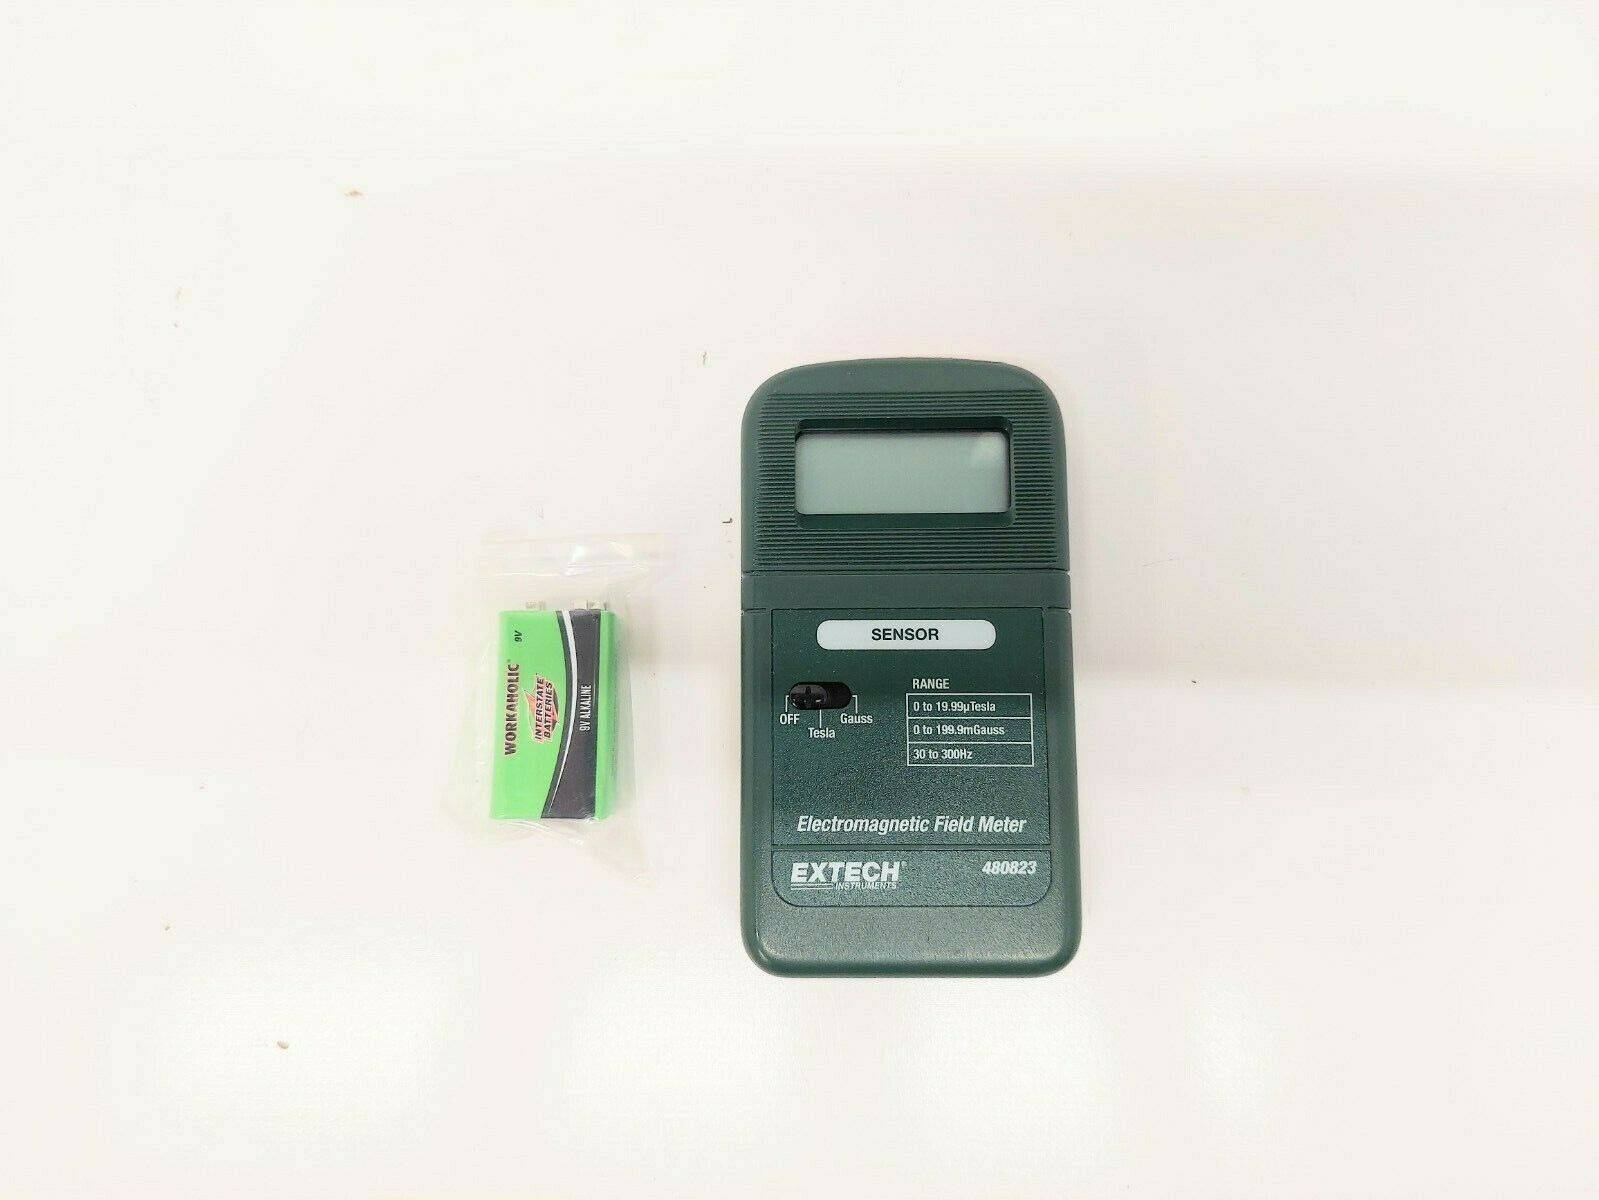 Extech 480823 Electromagnetic Field Meter Br